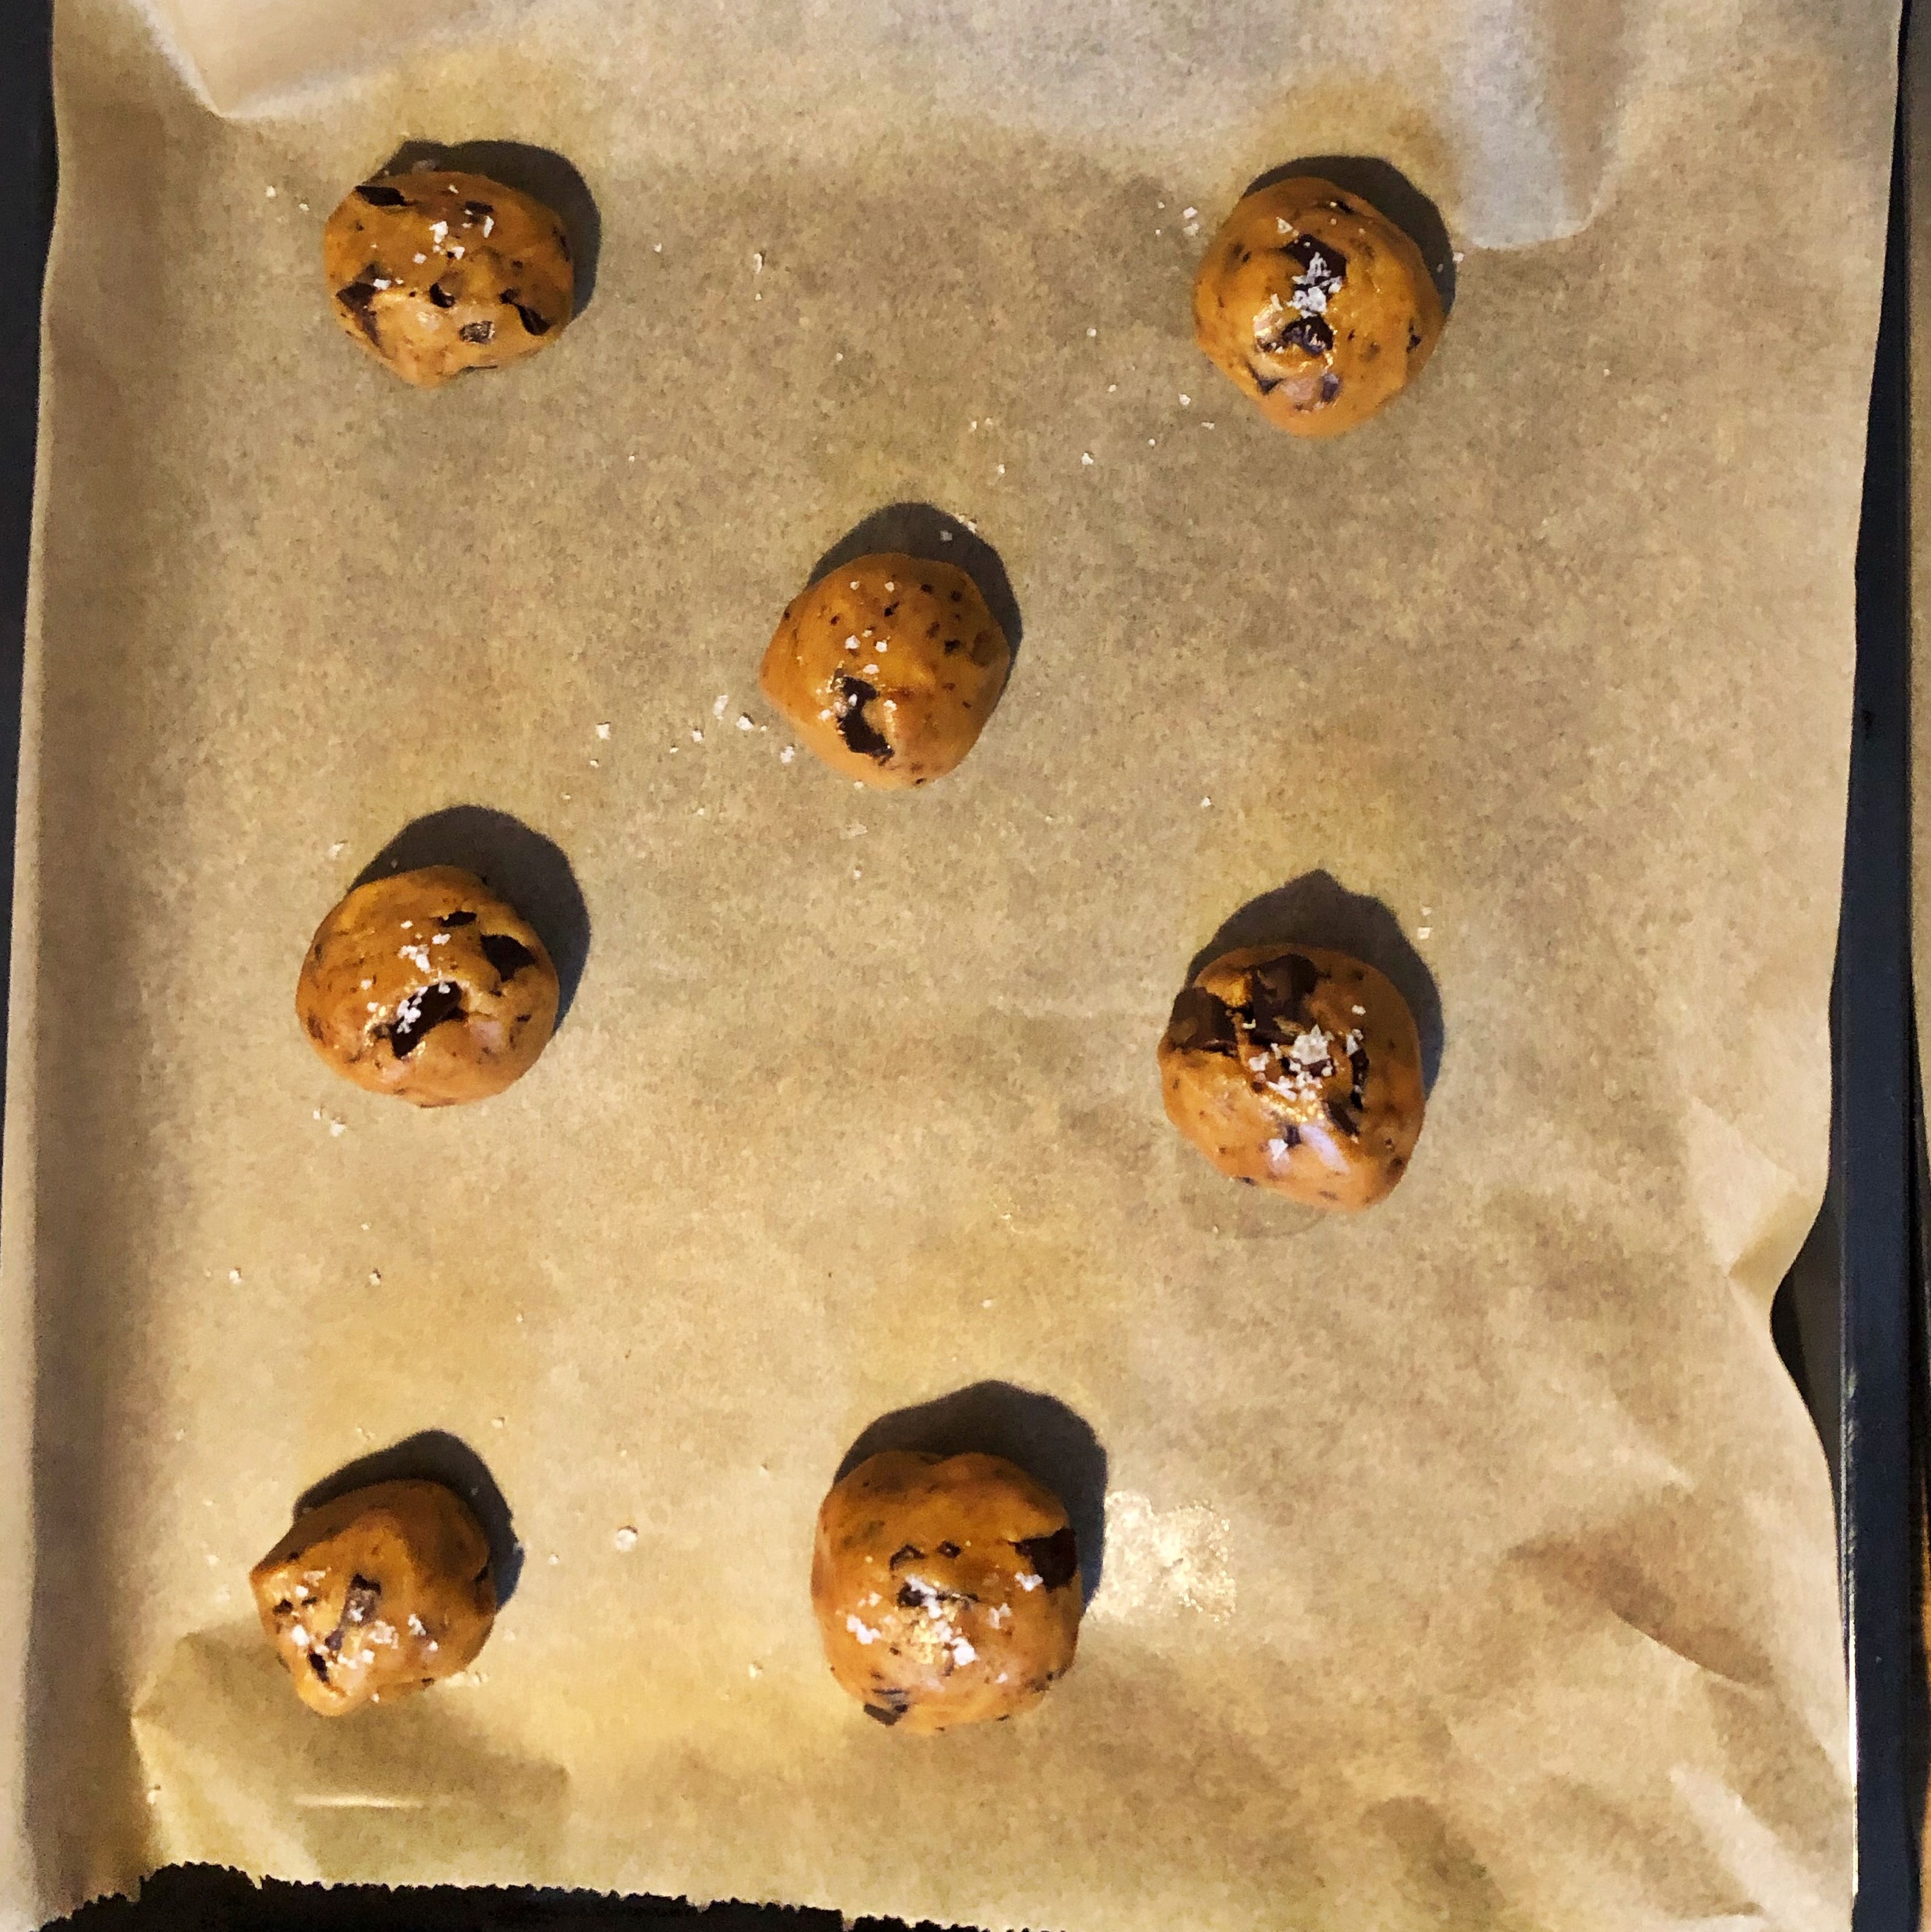 Roughly chop both chocolates, you should use one with 50% cacao, and one with 70% cacao. Fold chopped chocolate into the dough. Portion the dough into 12 equal-sized balls and transfer to two parchment-lined baking sheets. Sprinkle with flaky sea salt and bake for approx. 9 min.